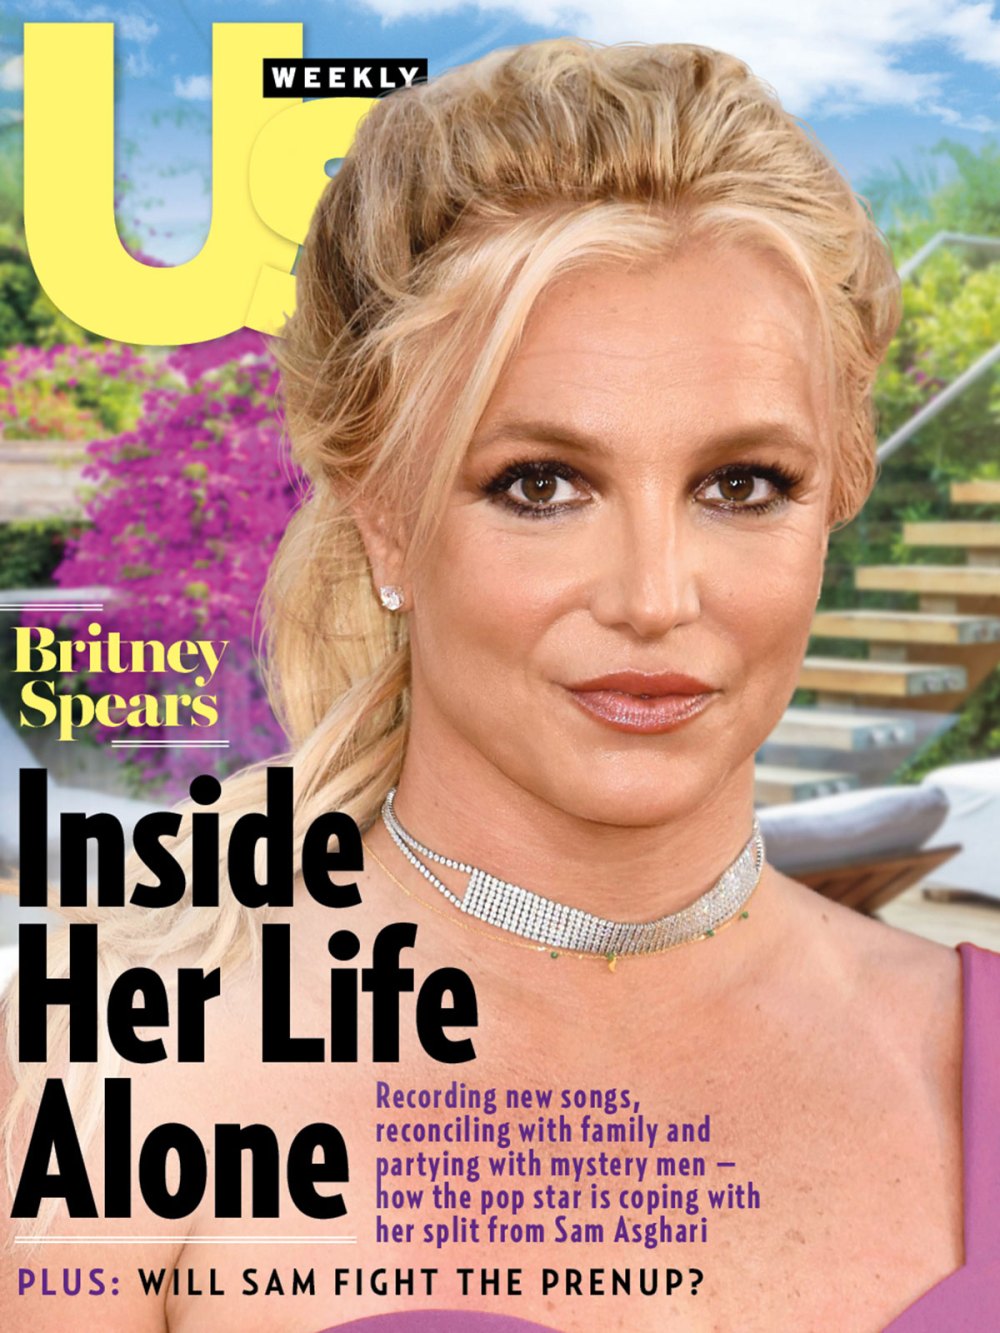 Britney Spears Us Weekly Cover 2337 No Chips